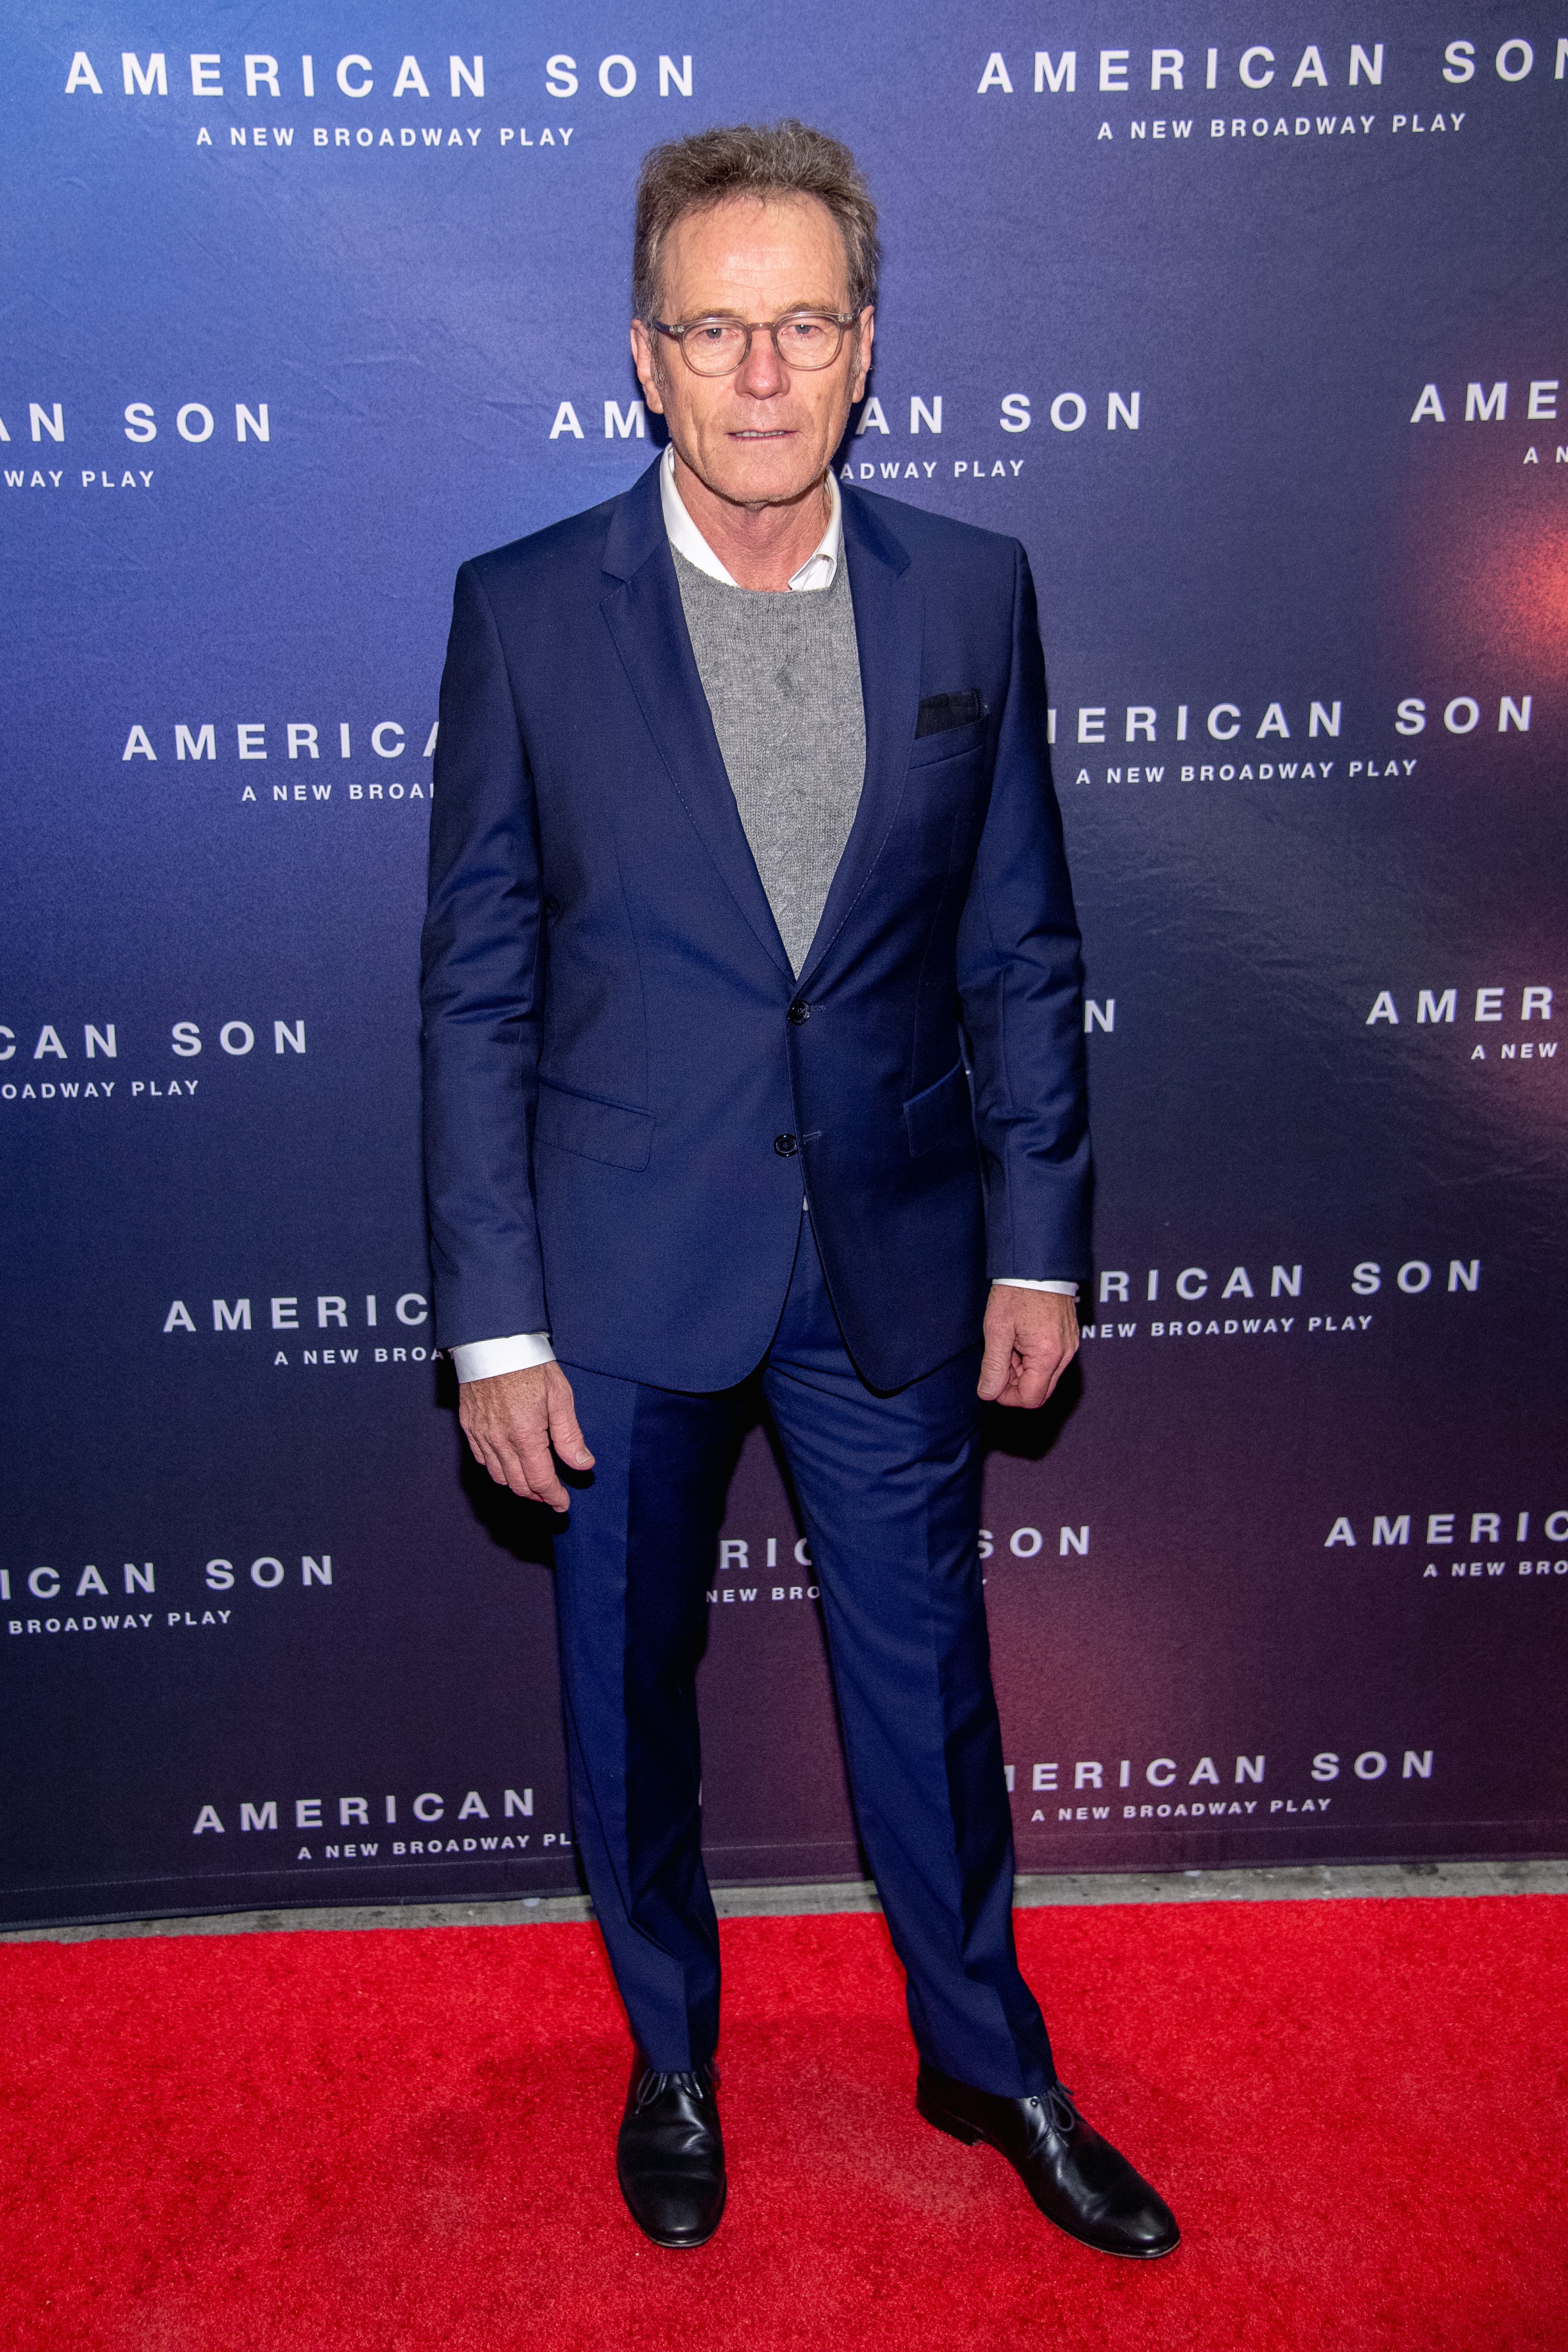 Bryan Cranston at the opening night of "American Son" on November 04, 2018 | Source: Getty Images